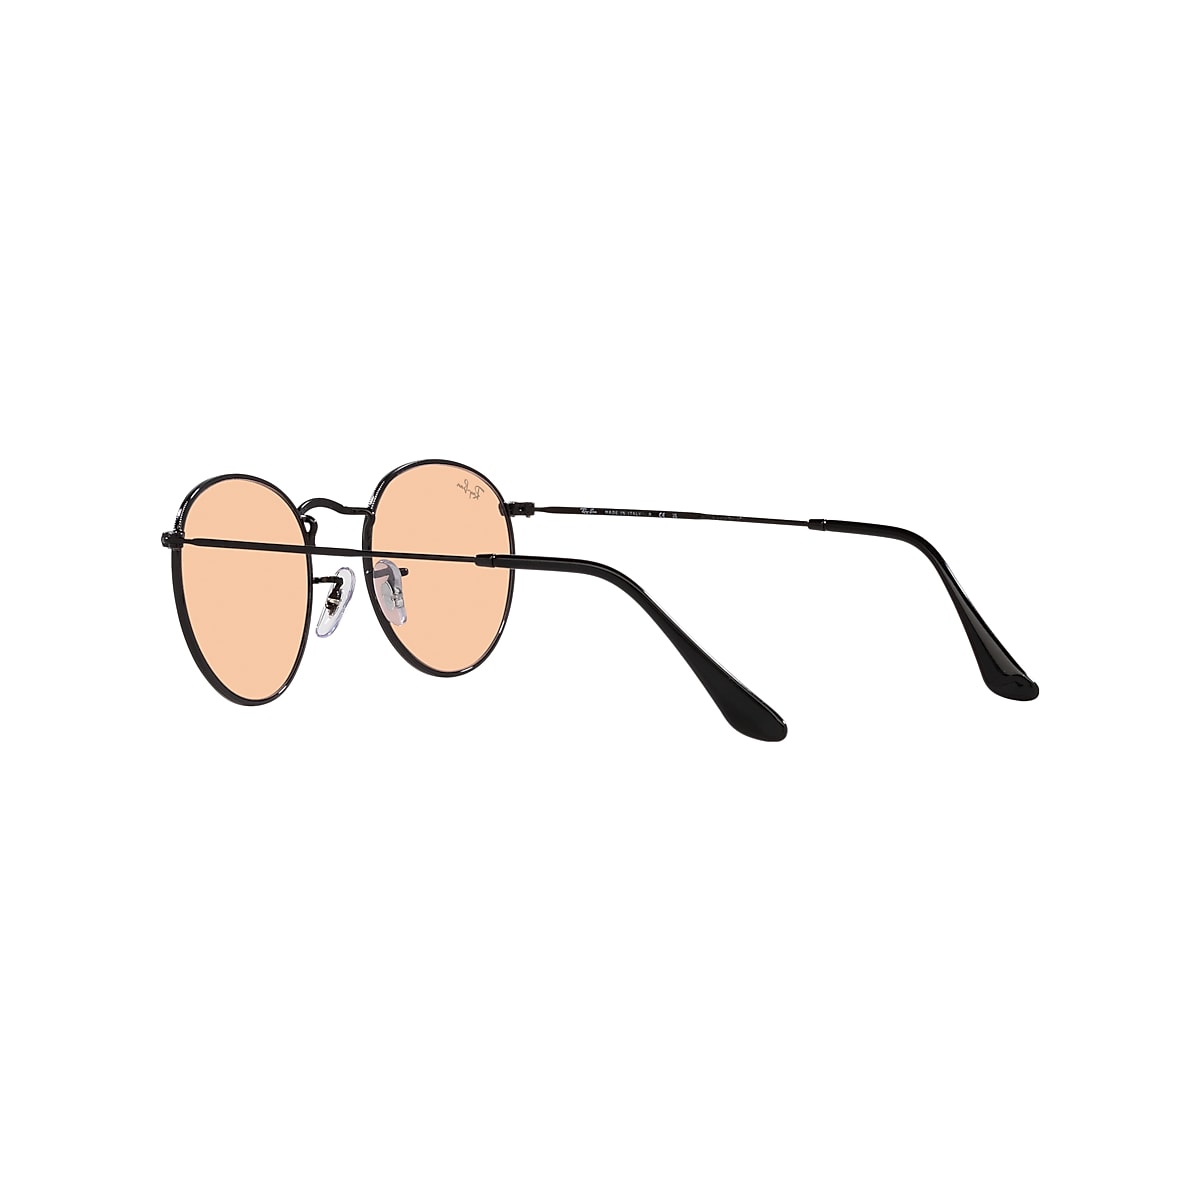 ROUND METAL WASHED LENSES RB3447 002/4B 50-21